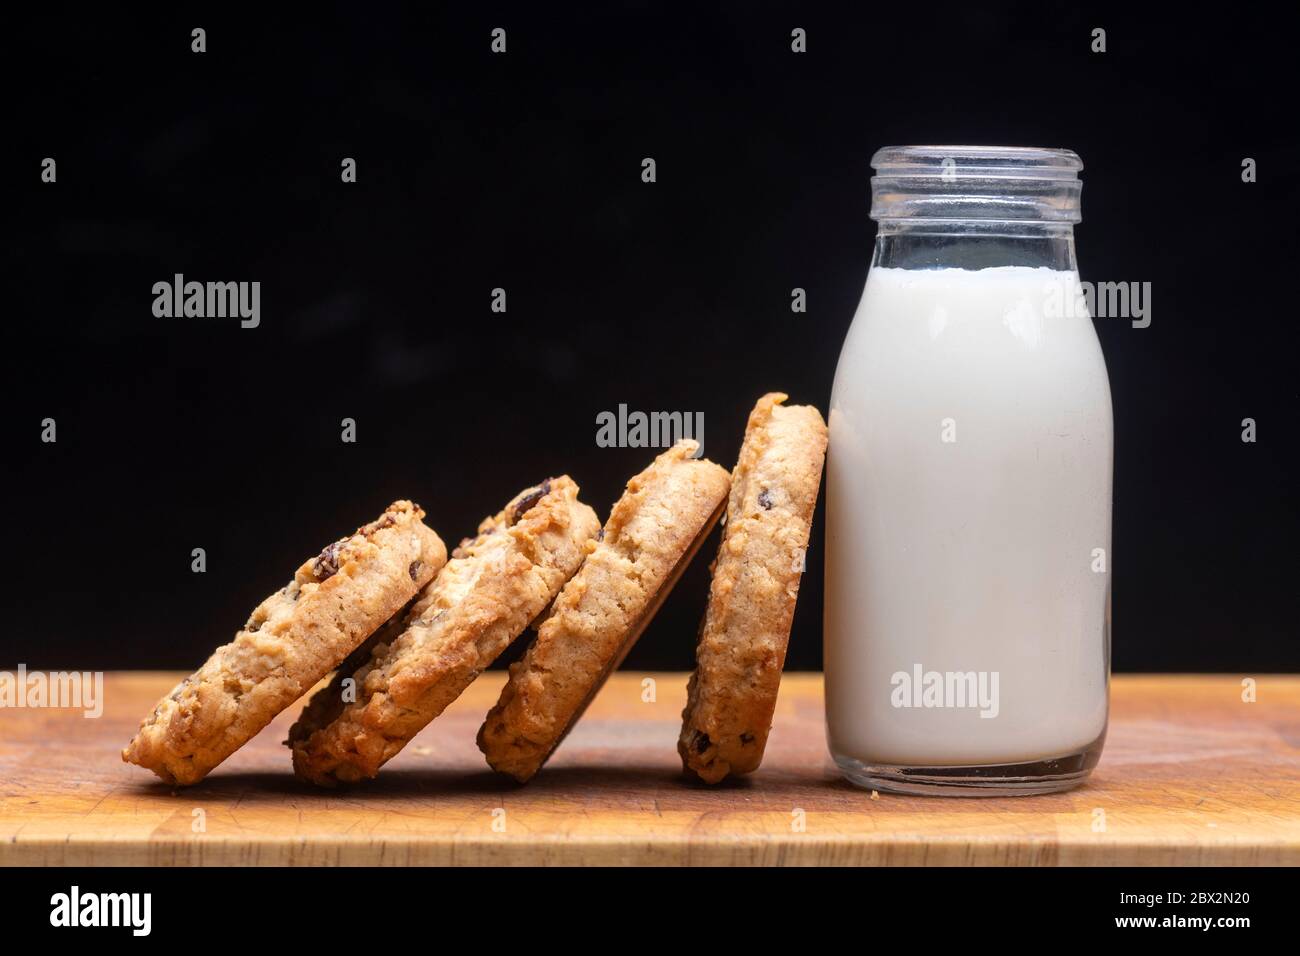 Milk and cookies, homemade fruit and oat cookies with a bottle of milk Stock Photo